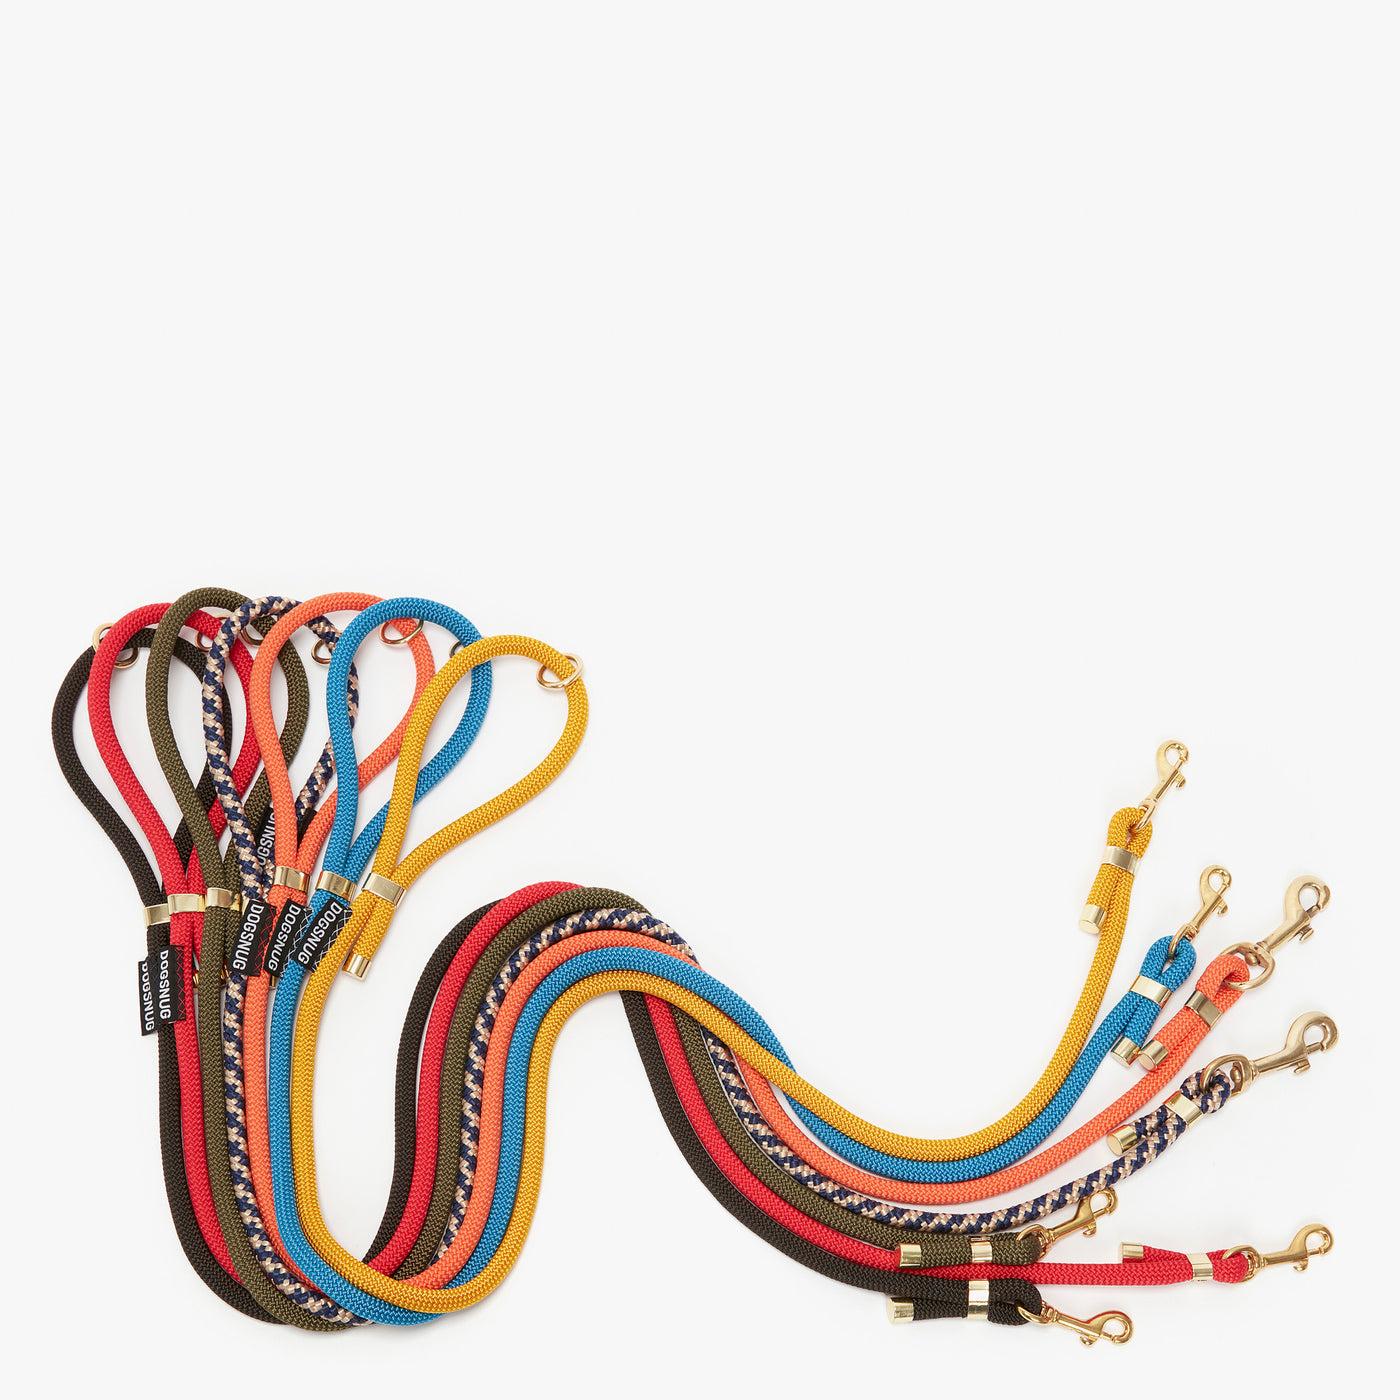 Rope dog leads in all available colours laid out